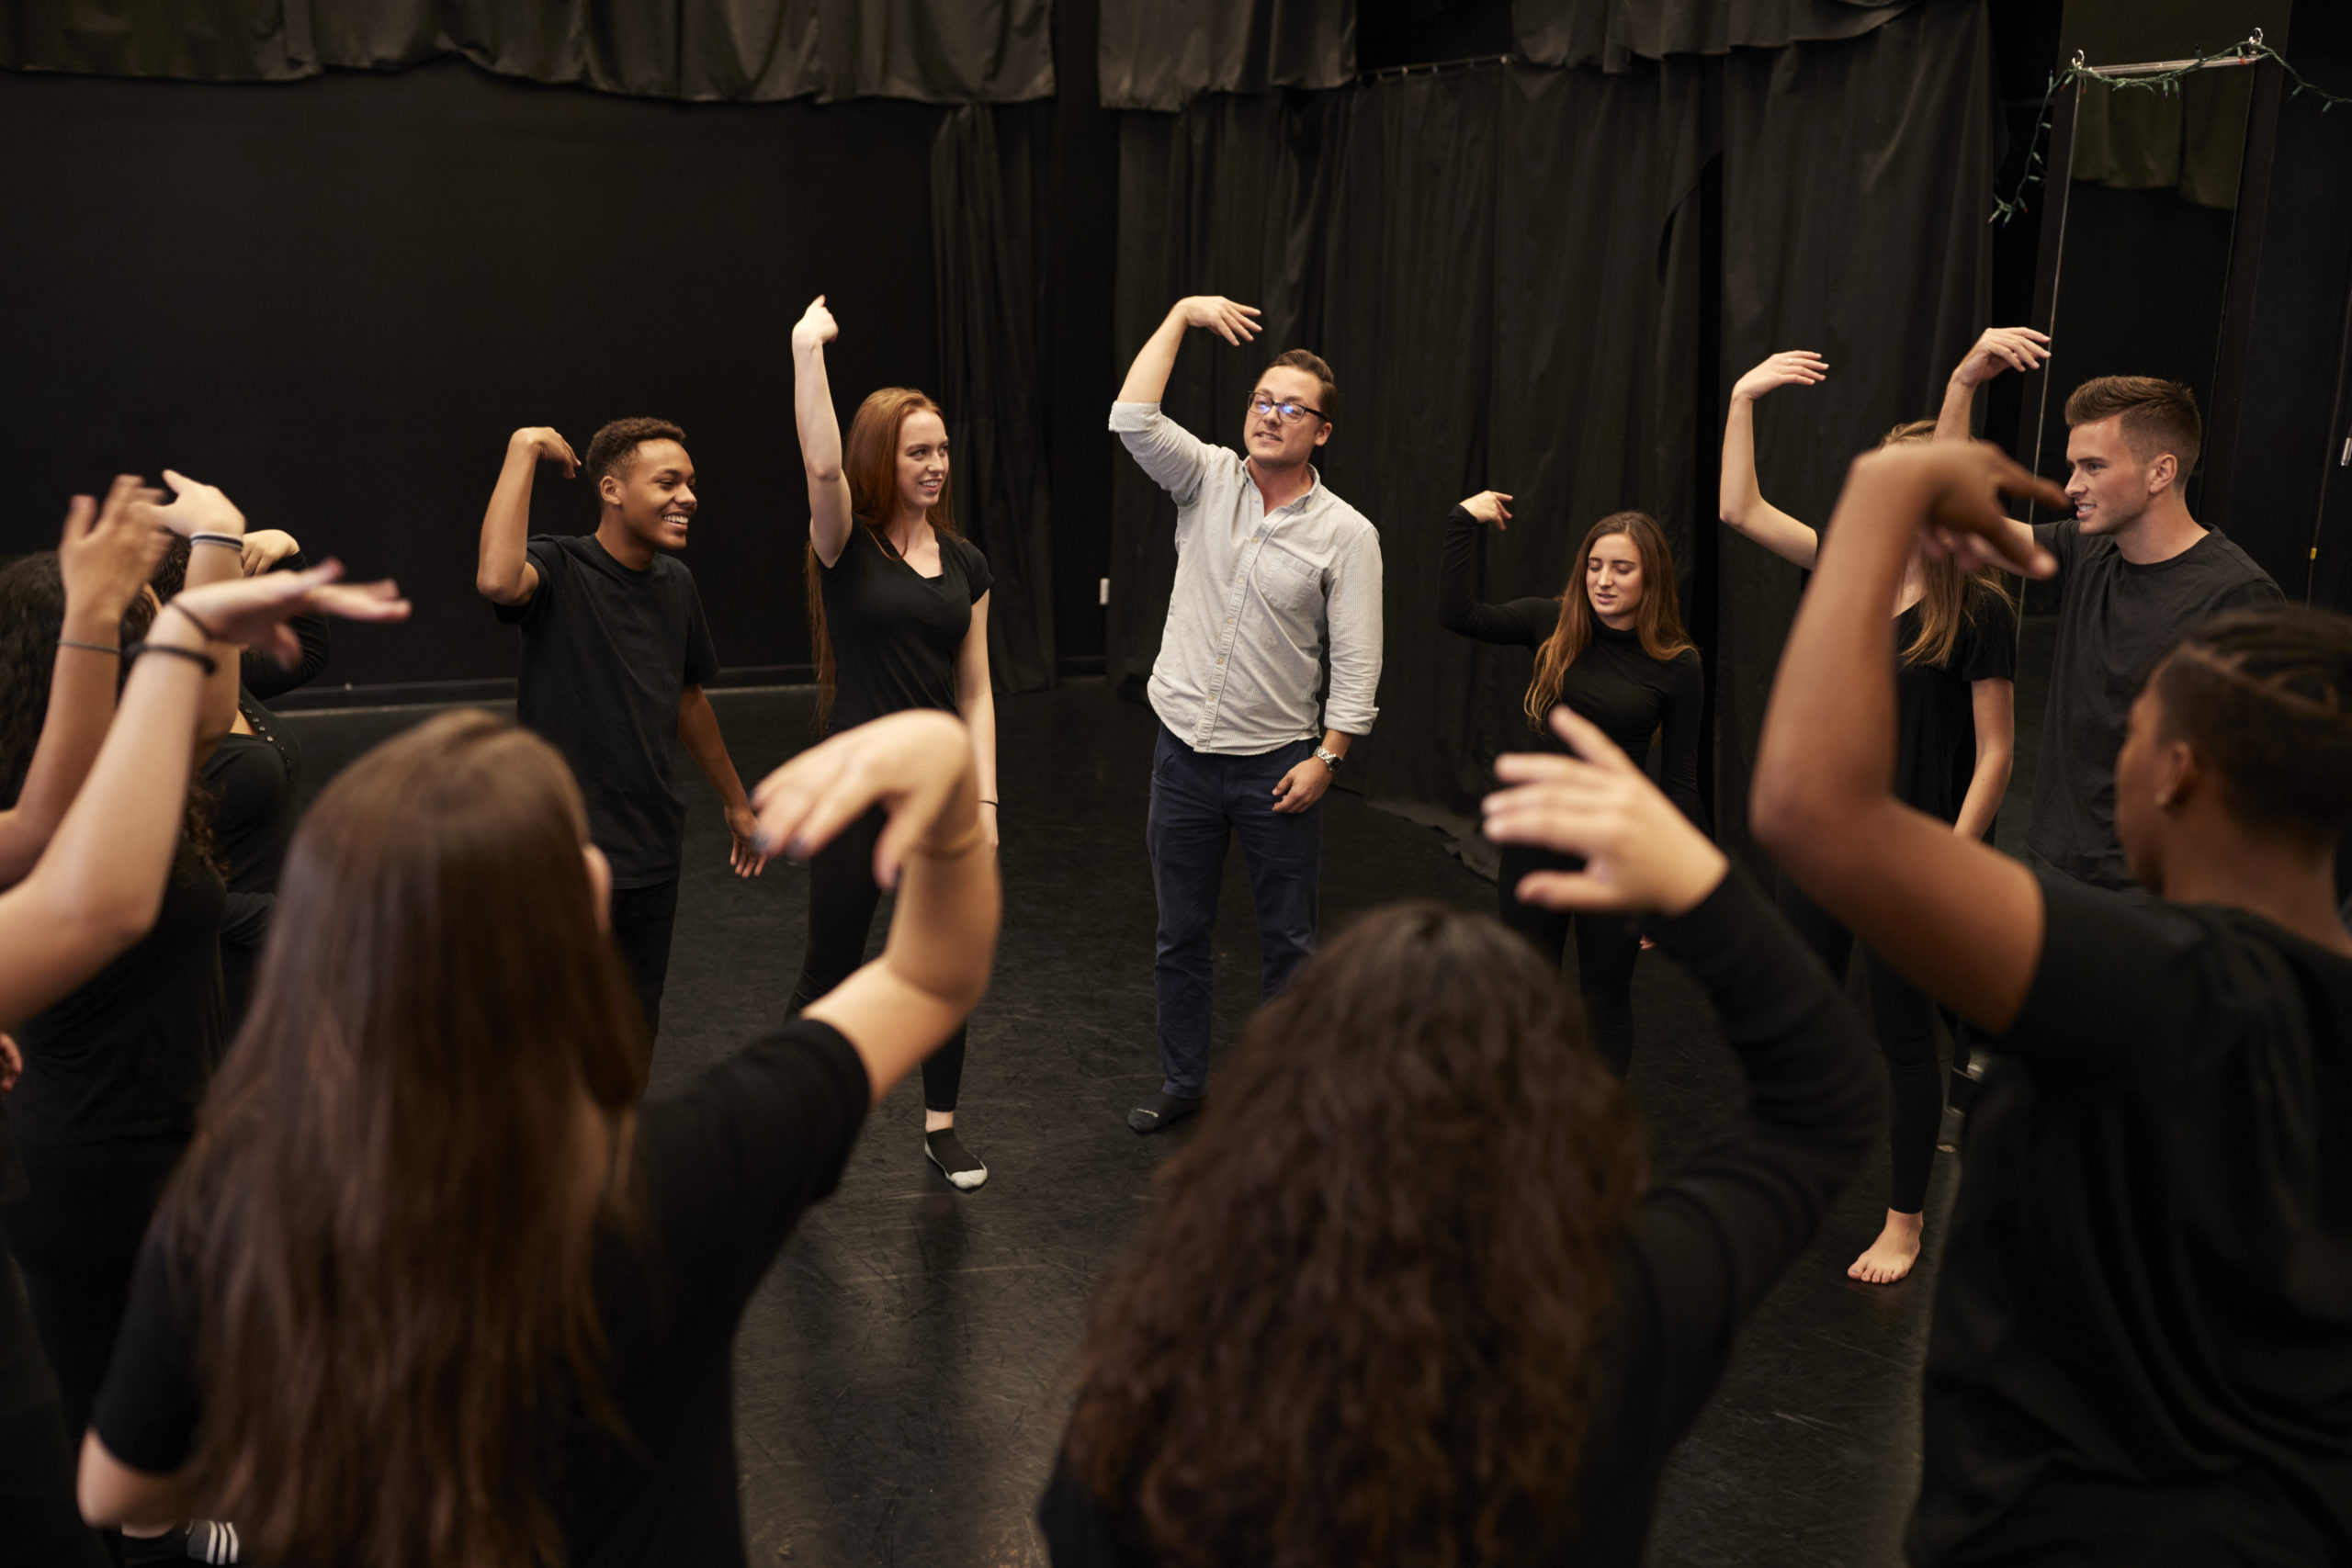 Teacher With Male And Female Drama Students At Performing Arts School In Studio Improvisation Class